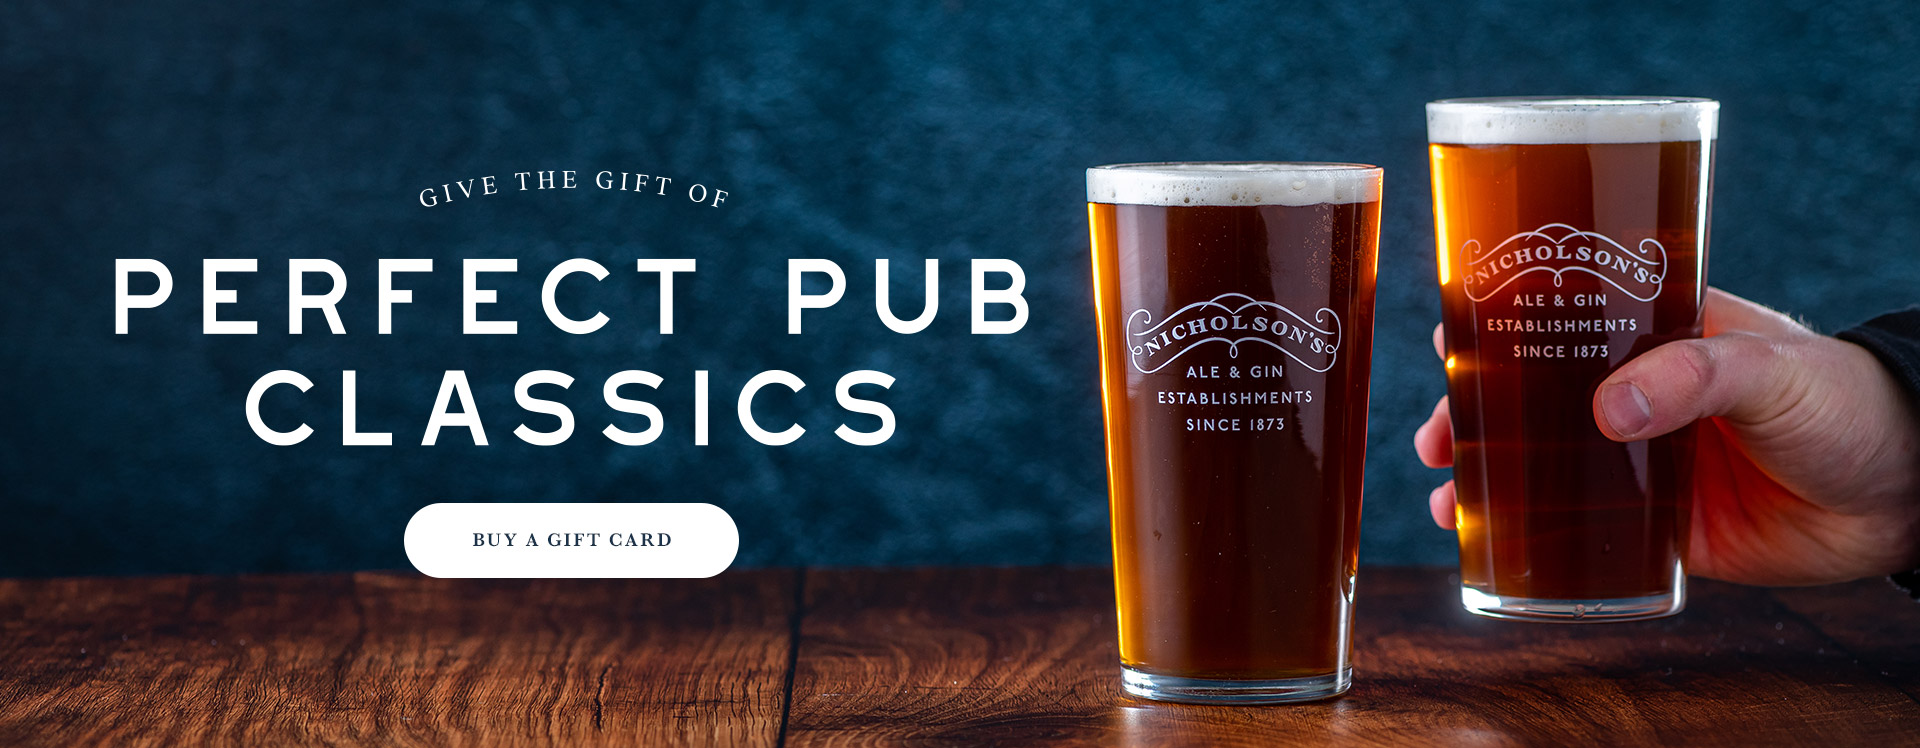 Nicholson’s Pub Gift Voucher at The Hoop and Grapes in London